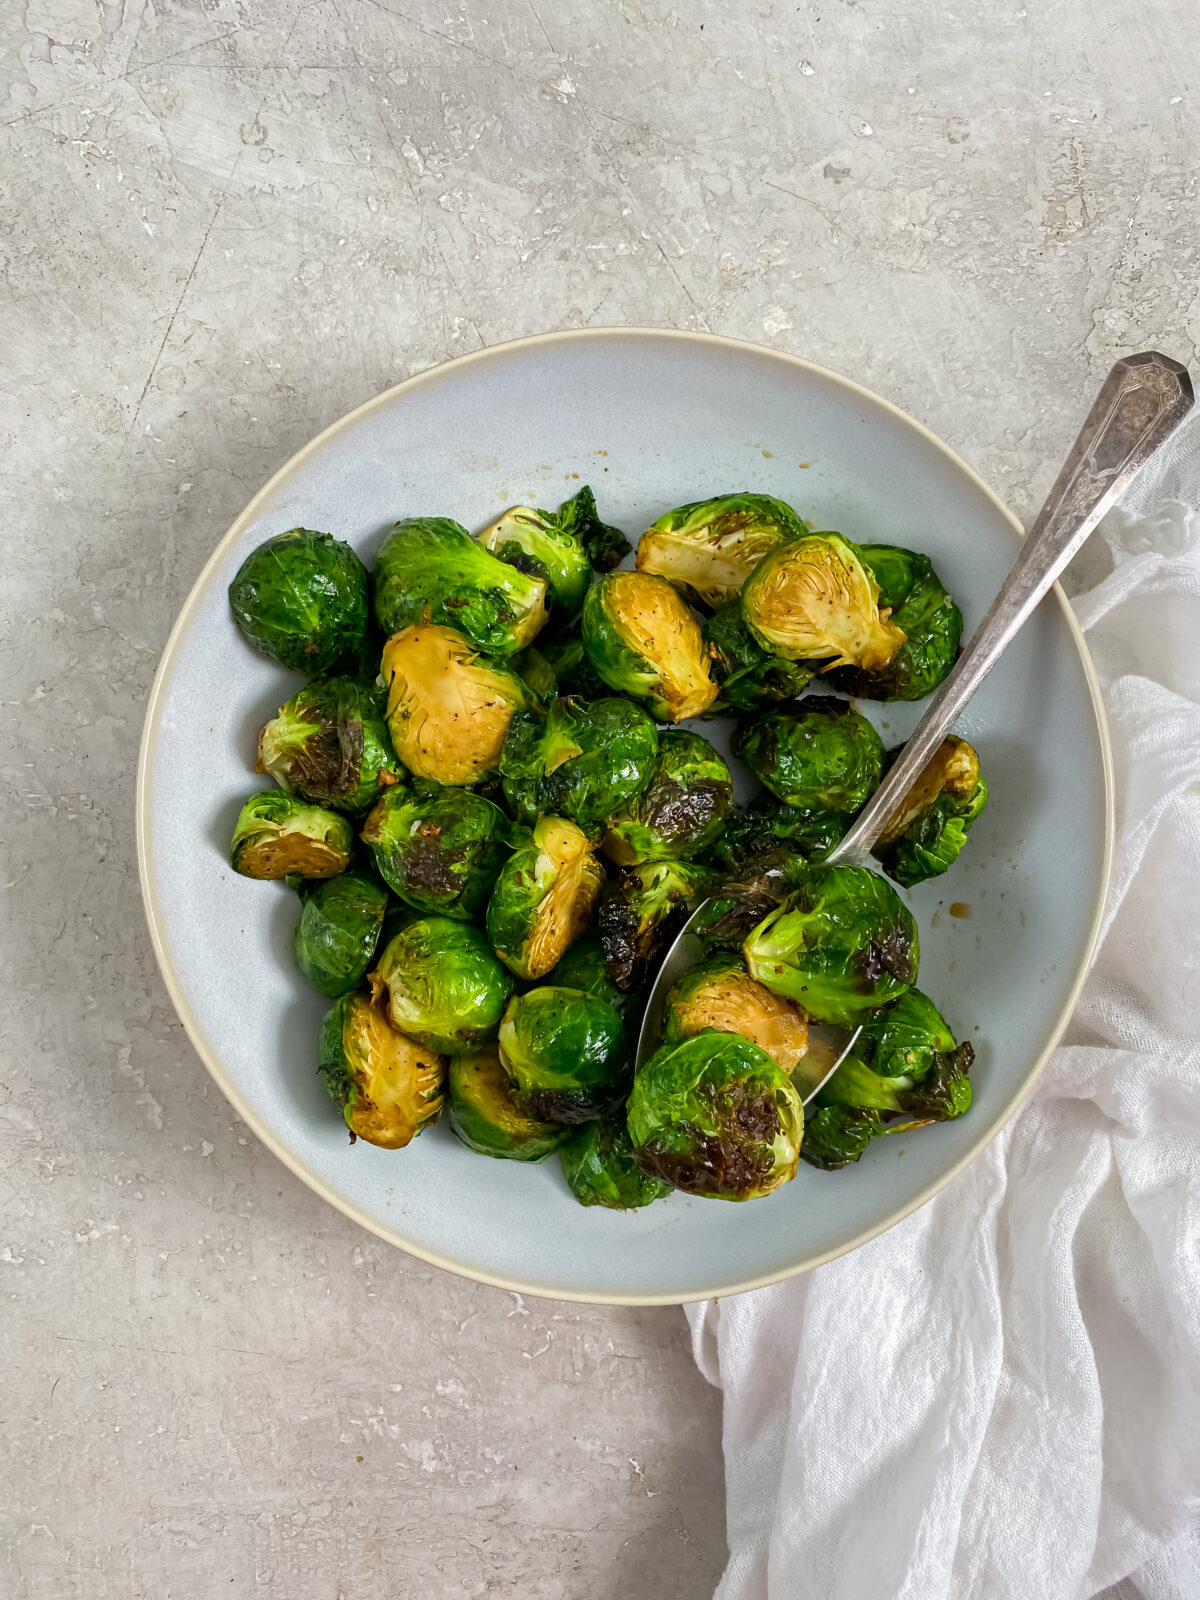 Brussel sprouts in a bowl with a spoon and white napkin 